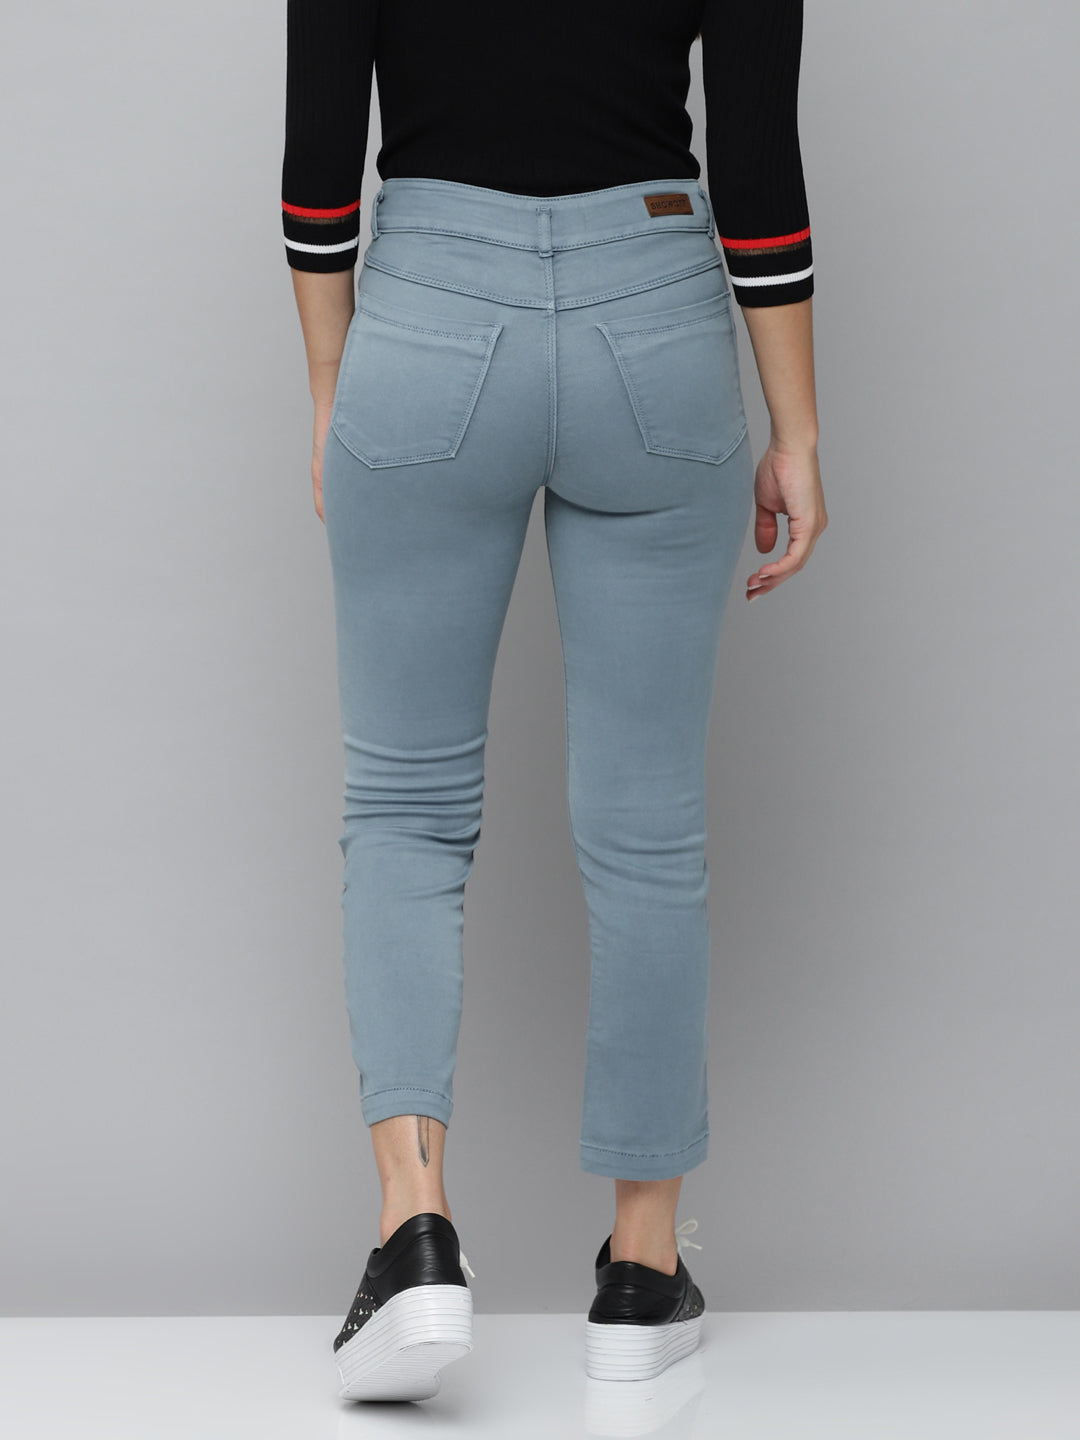 Women's Grey Solid Straight Fit Denim Jeans